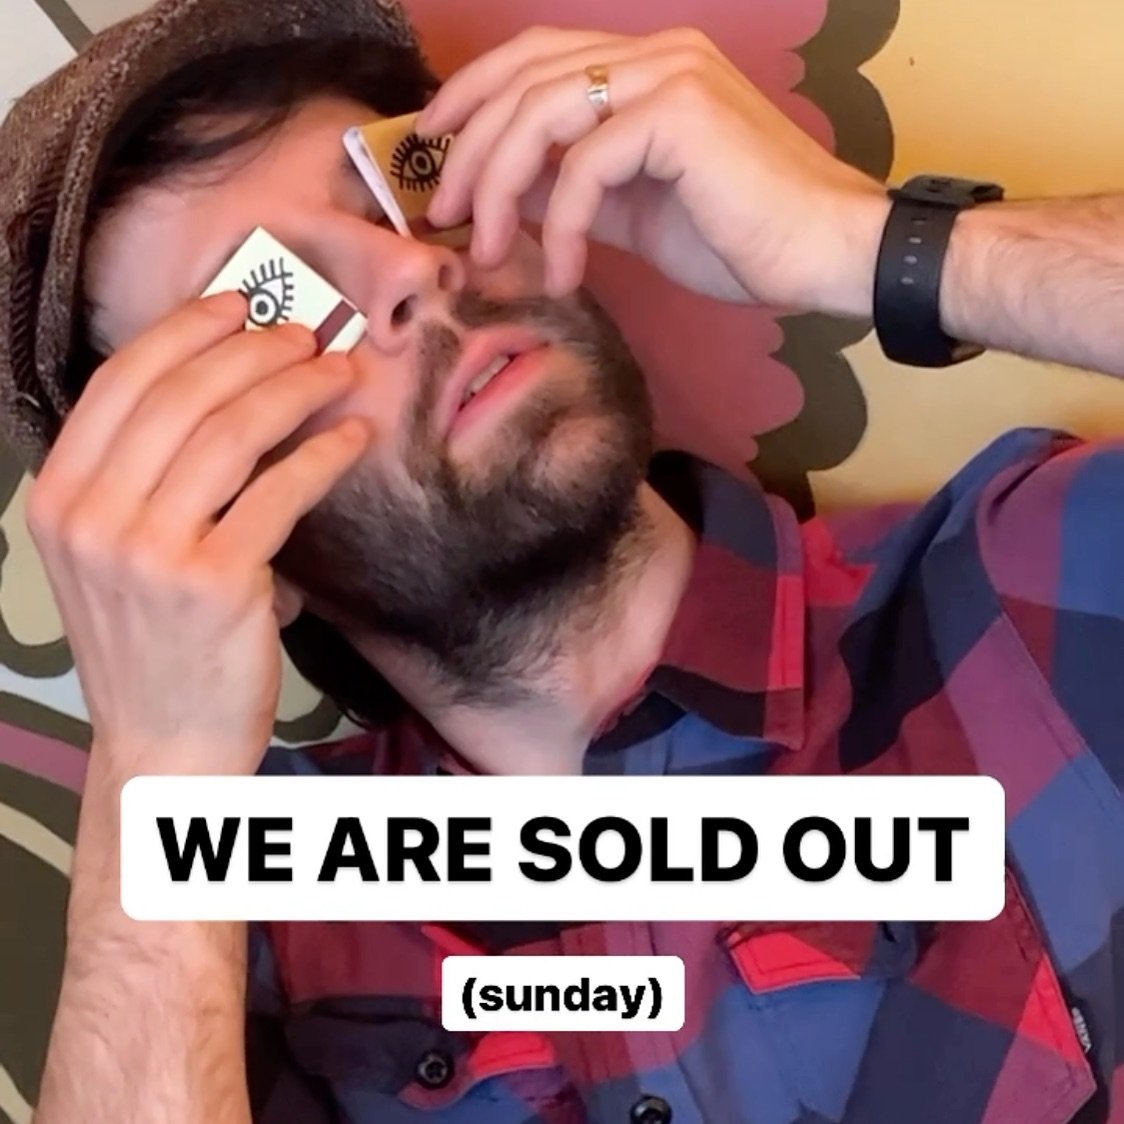 YALL CRUSHED US

we are sold out for today (sunday). See ya tomorrow!